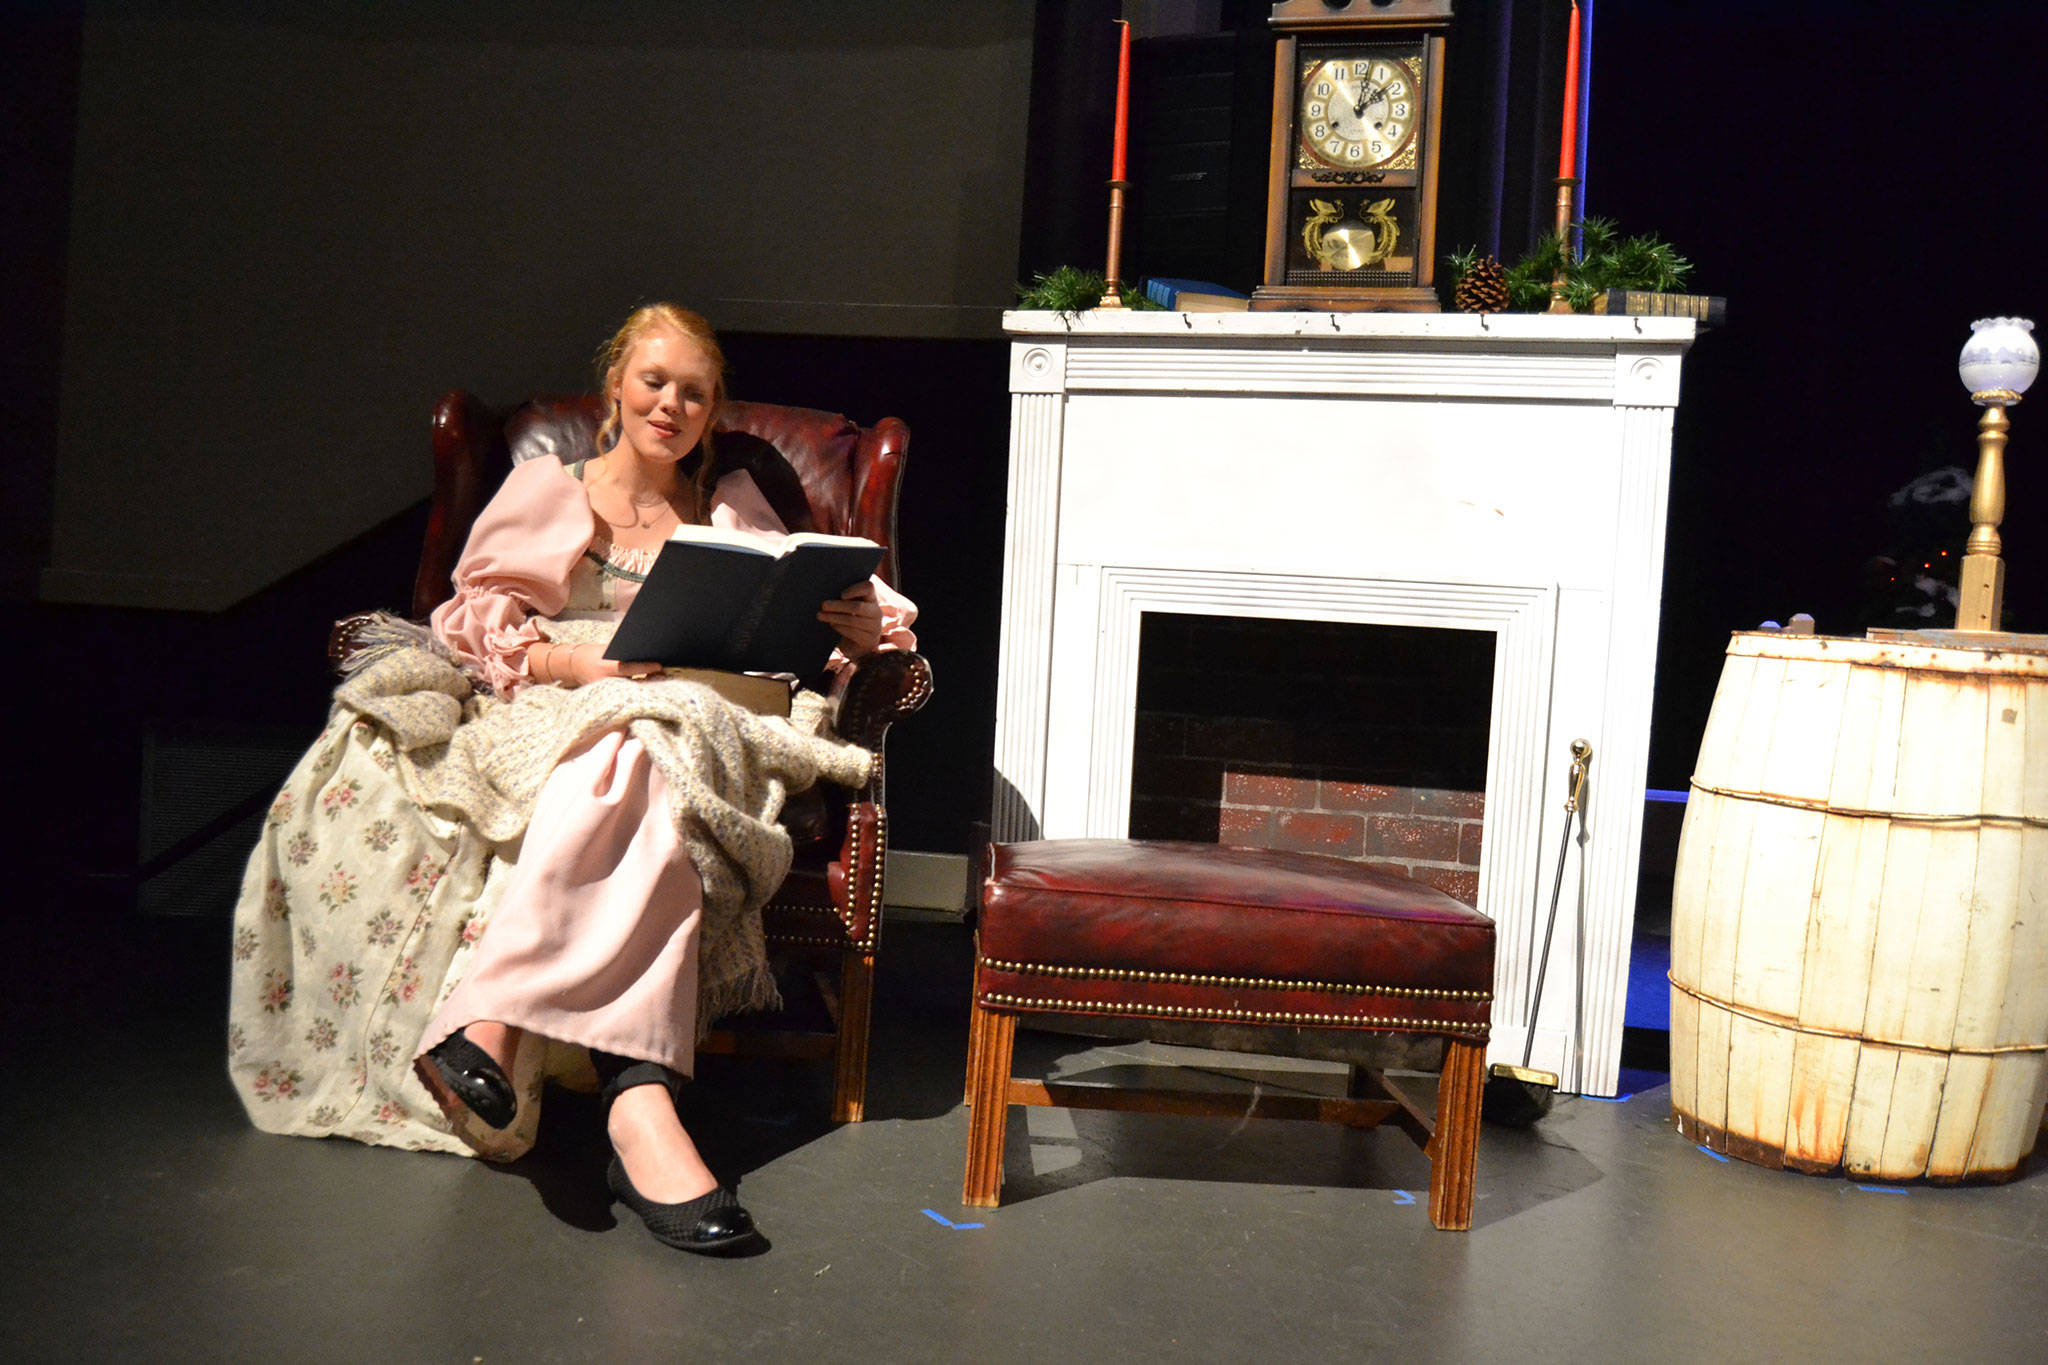 Emily Bundy is one of five narrators in “A Christmas Carol” on Dec. 7-8, 14-15 at Sequim High.